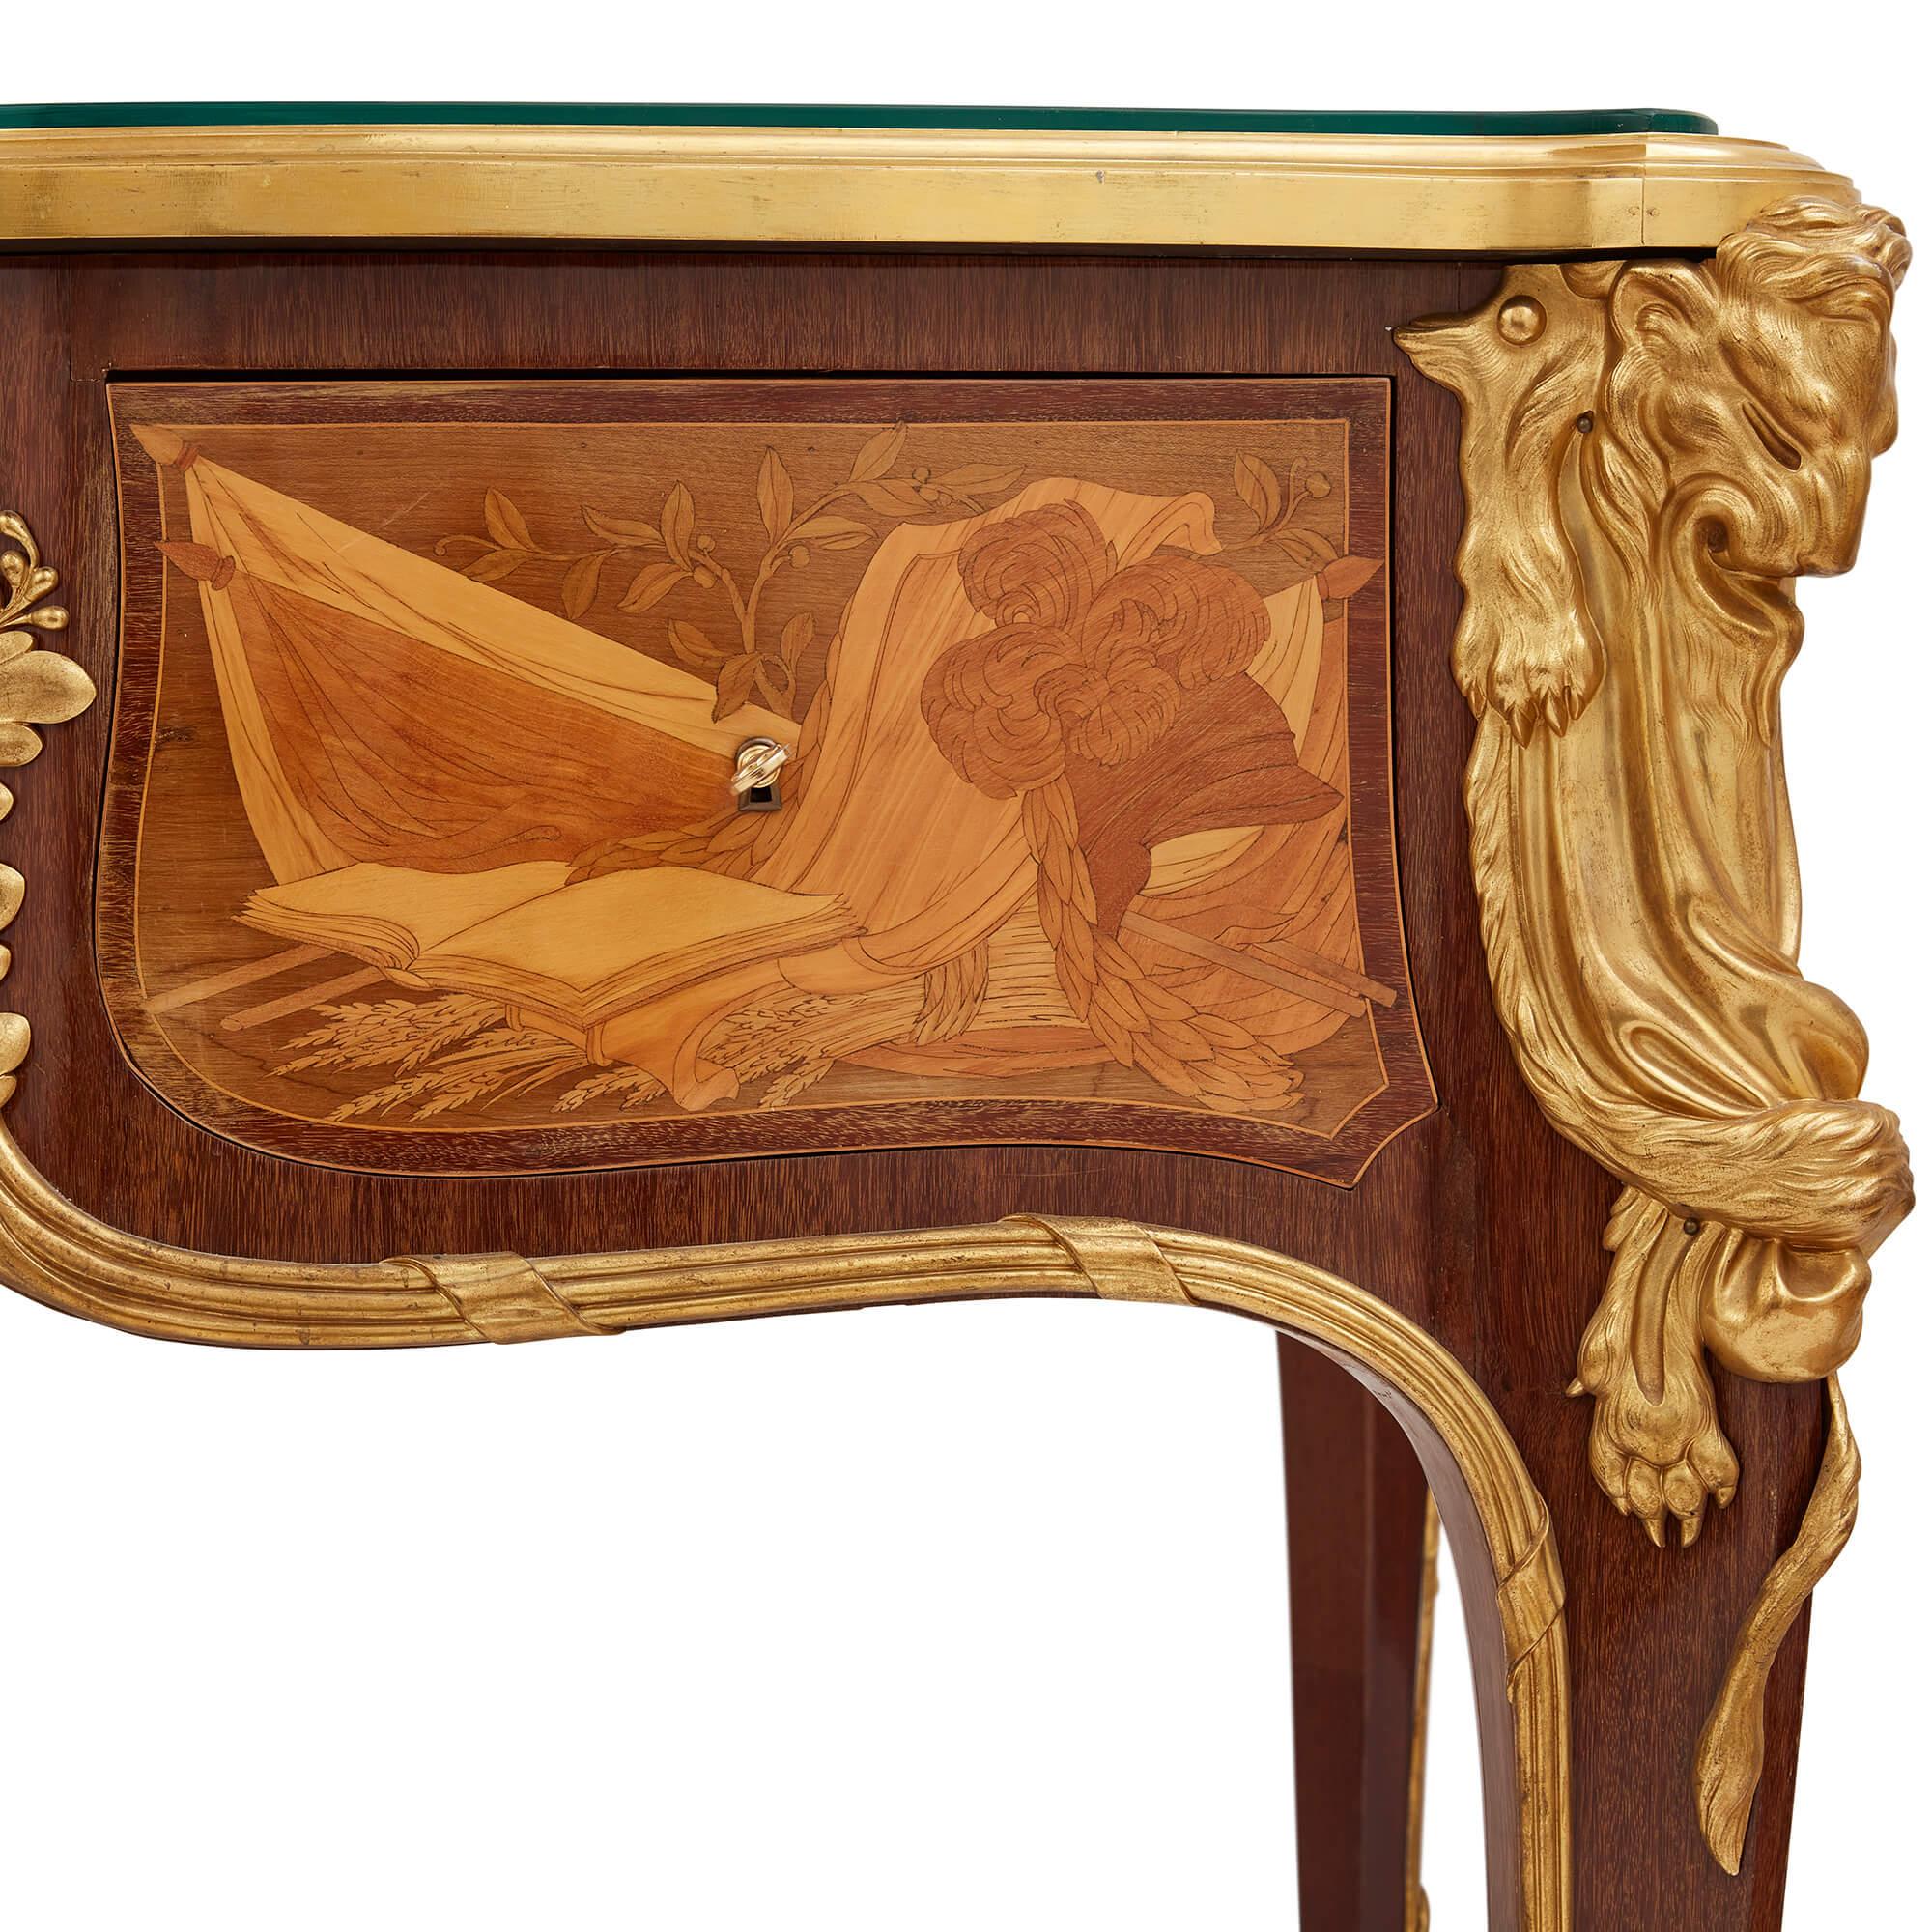 Antique French Louis XV Style Ormolu Mounted Marquetry Desk by Maison Léger For Sale 1